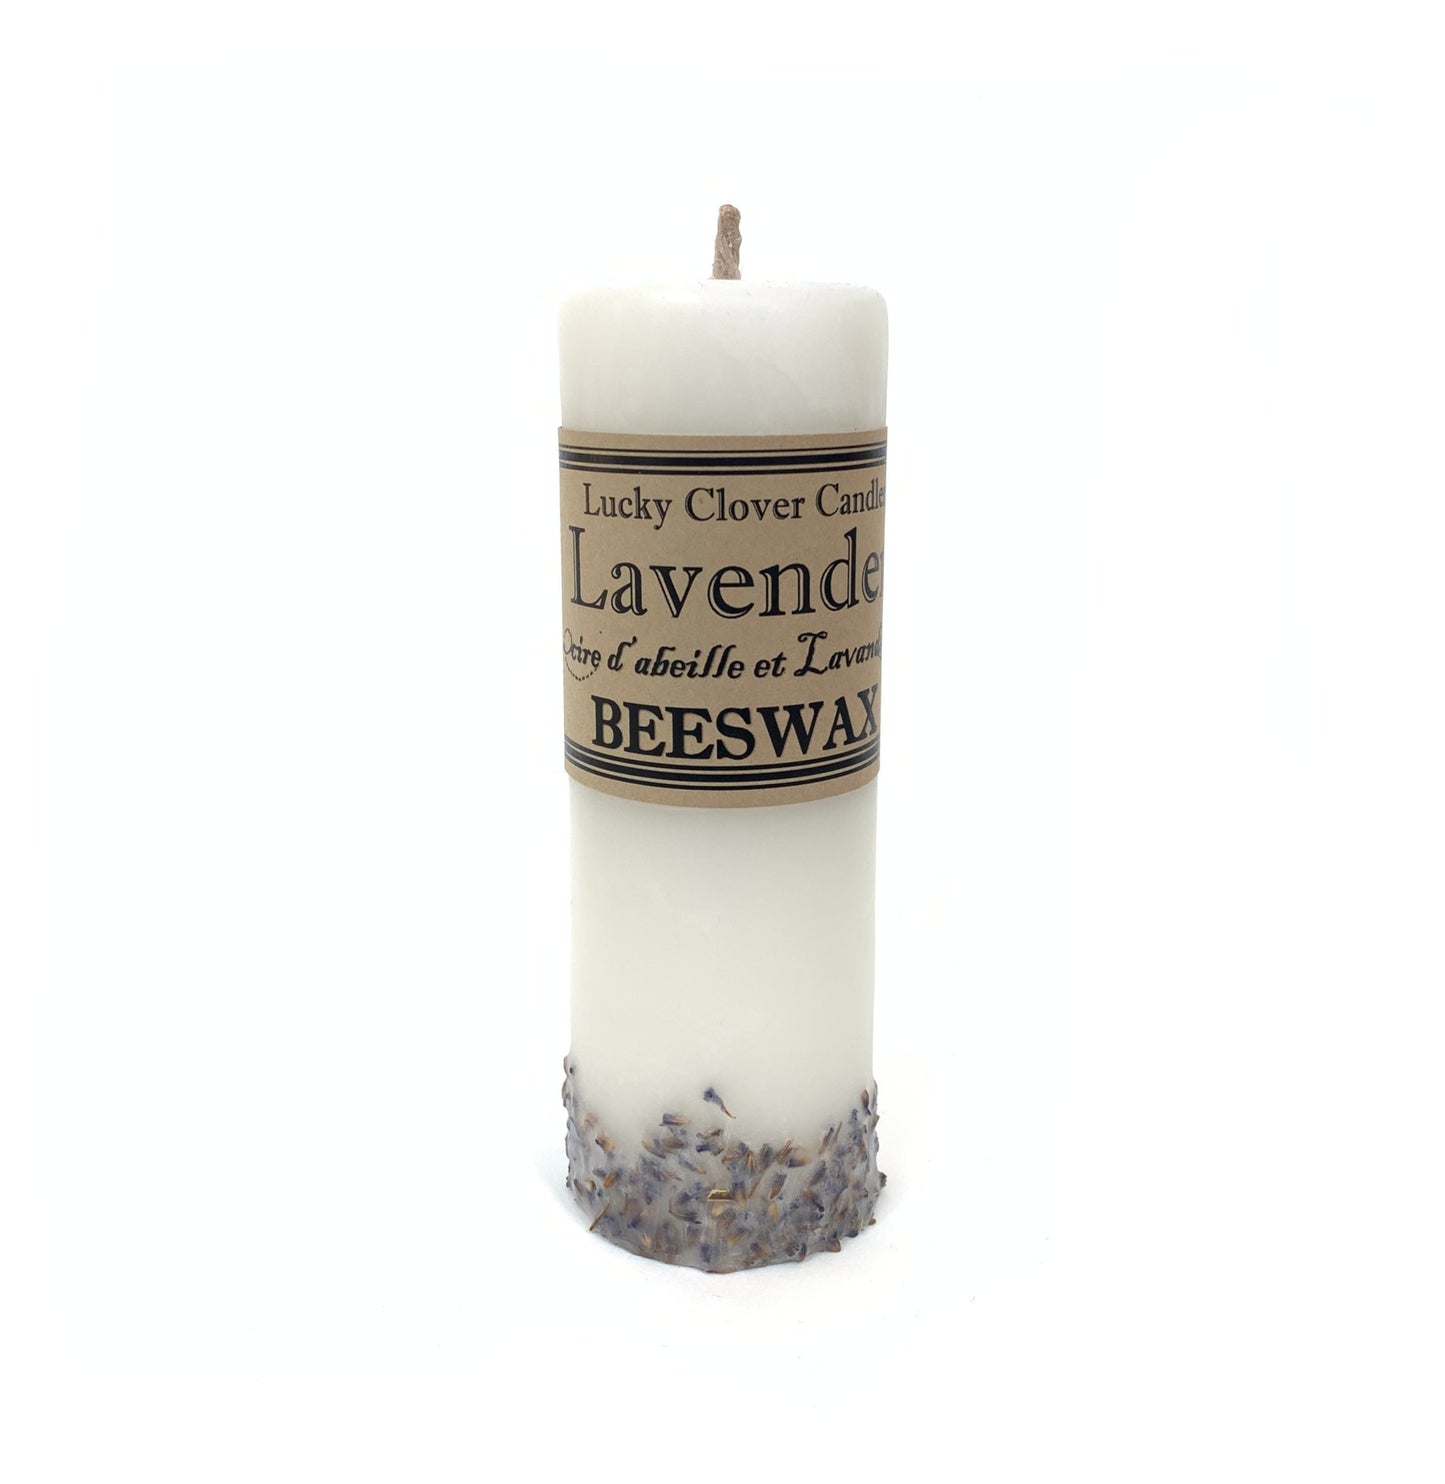 Made in Canada lavender infused Canadian beeswax candle.